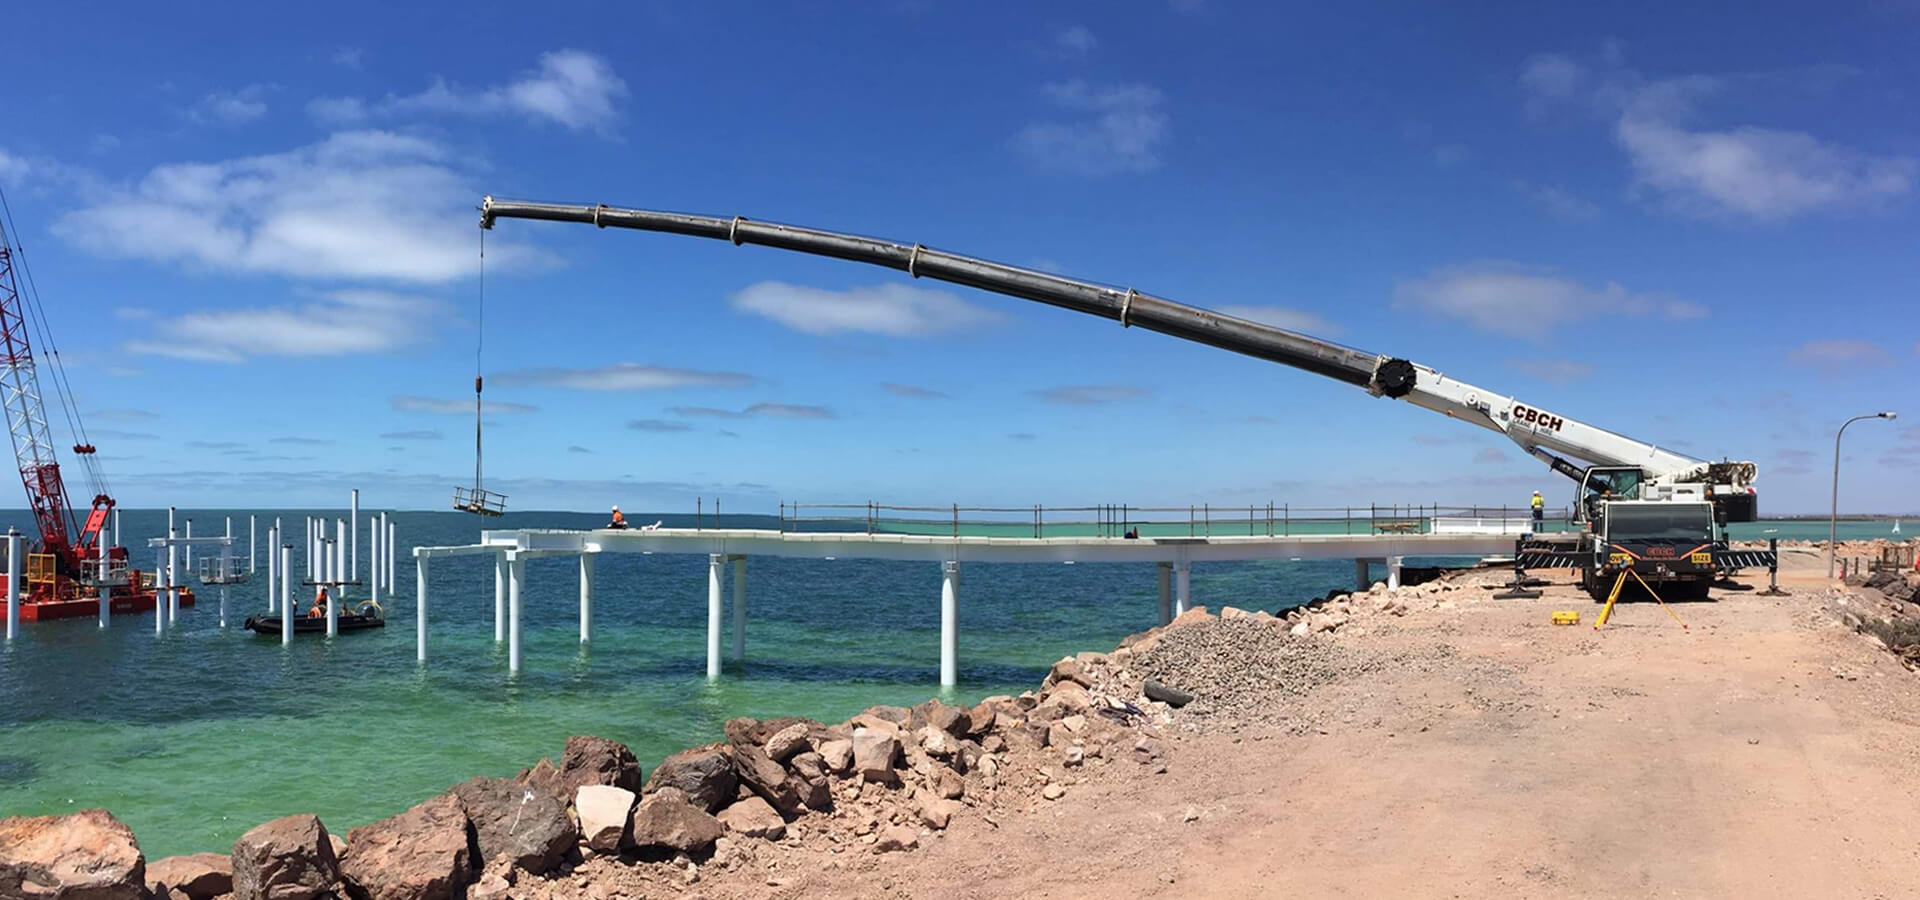 CBCH Crane Hire Whyalla News